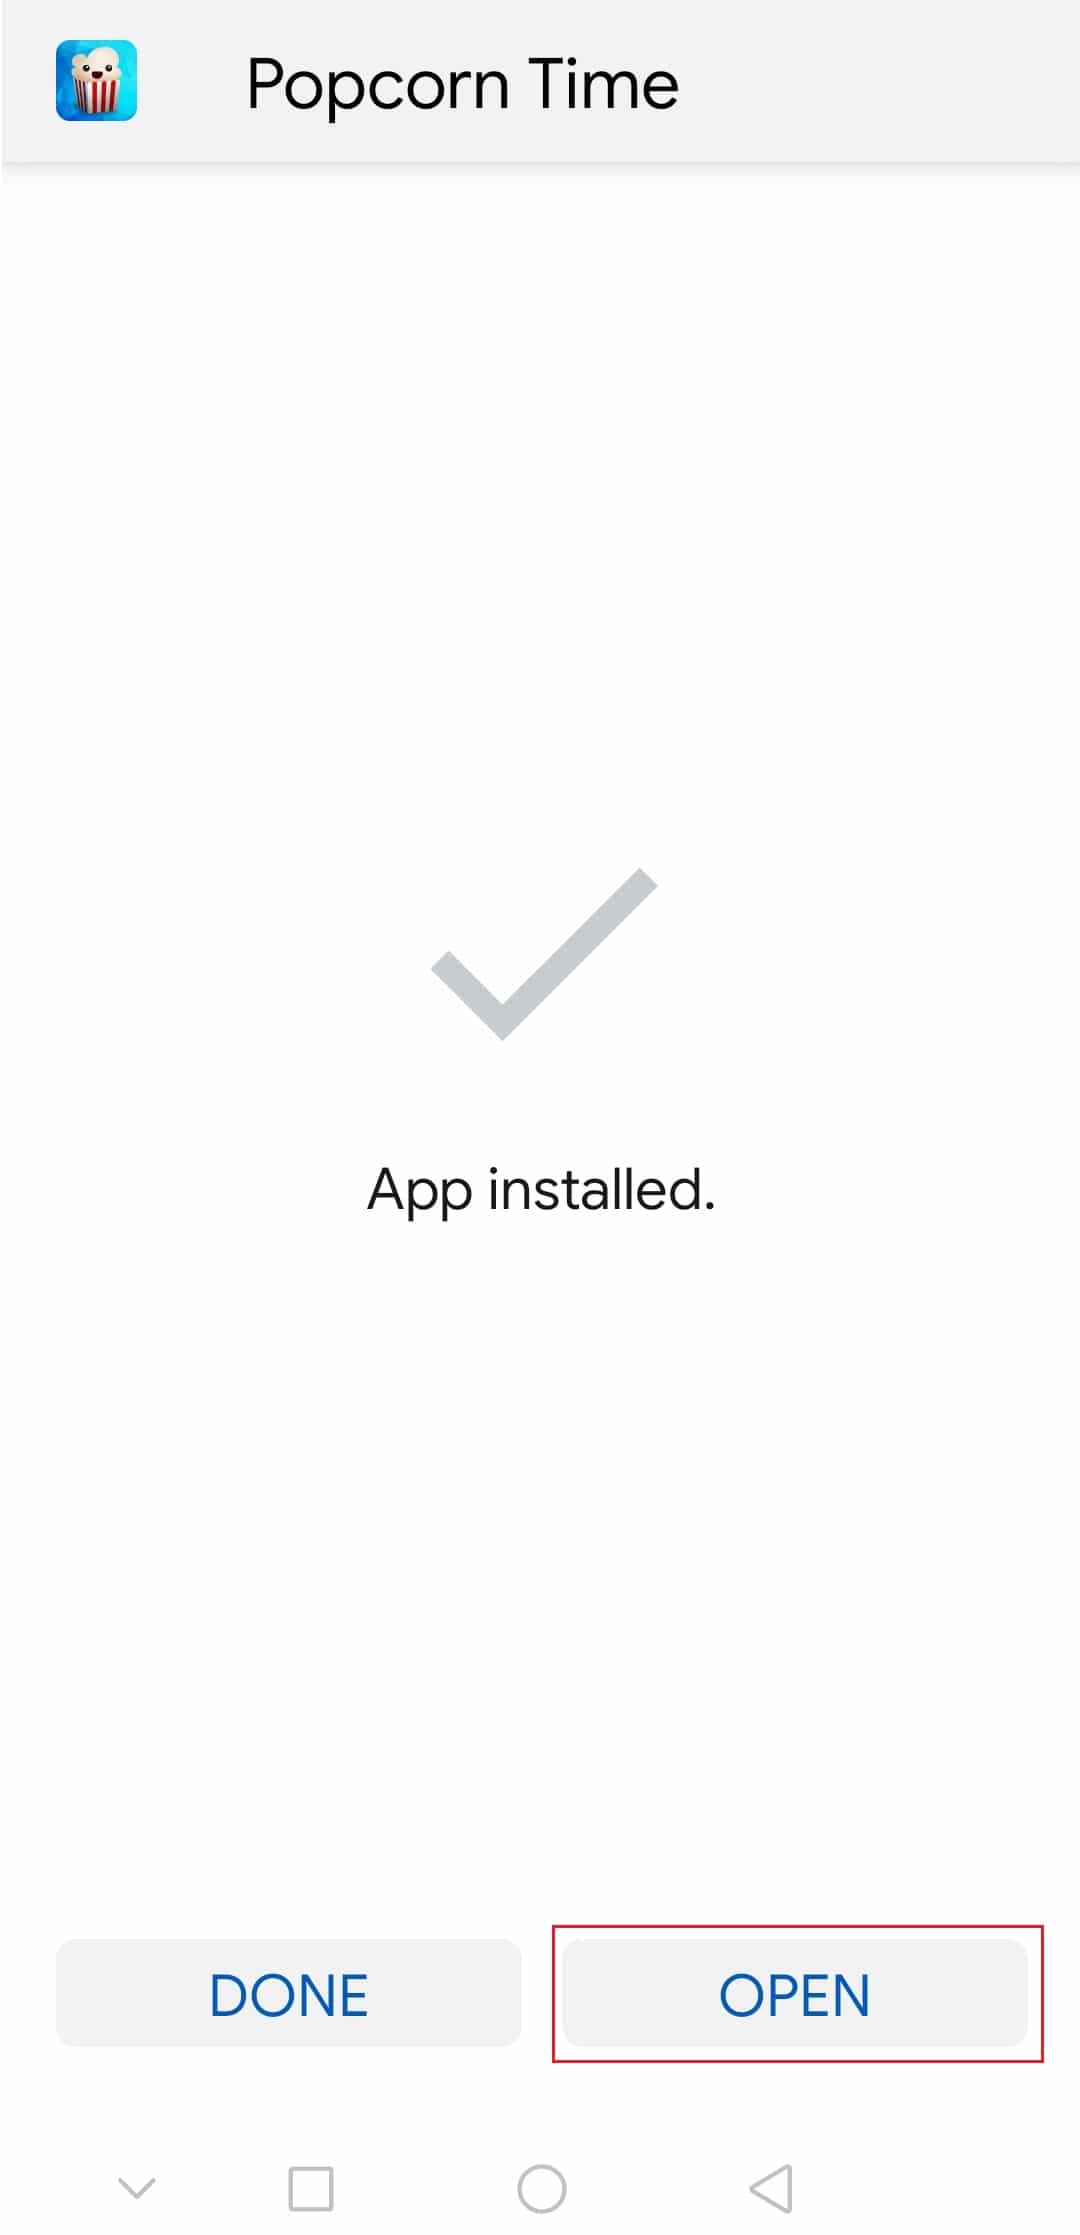 tap on Open after installing popcorn time android app